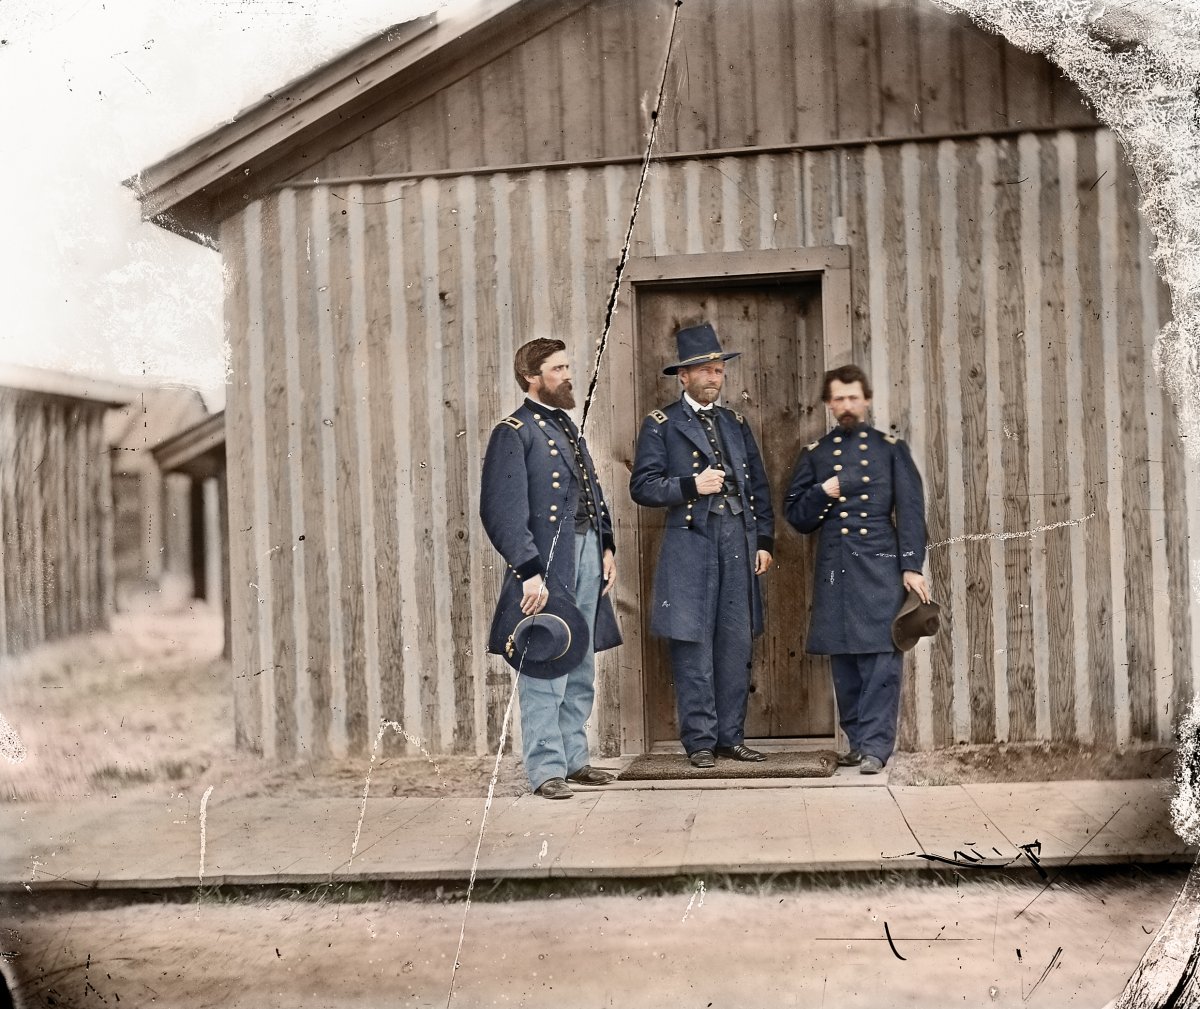 General Grant with two of his officers.